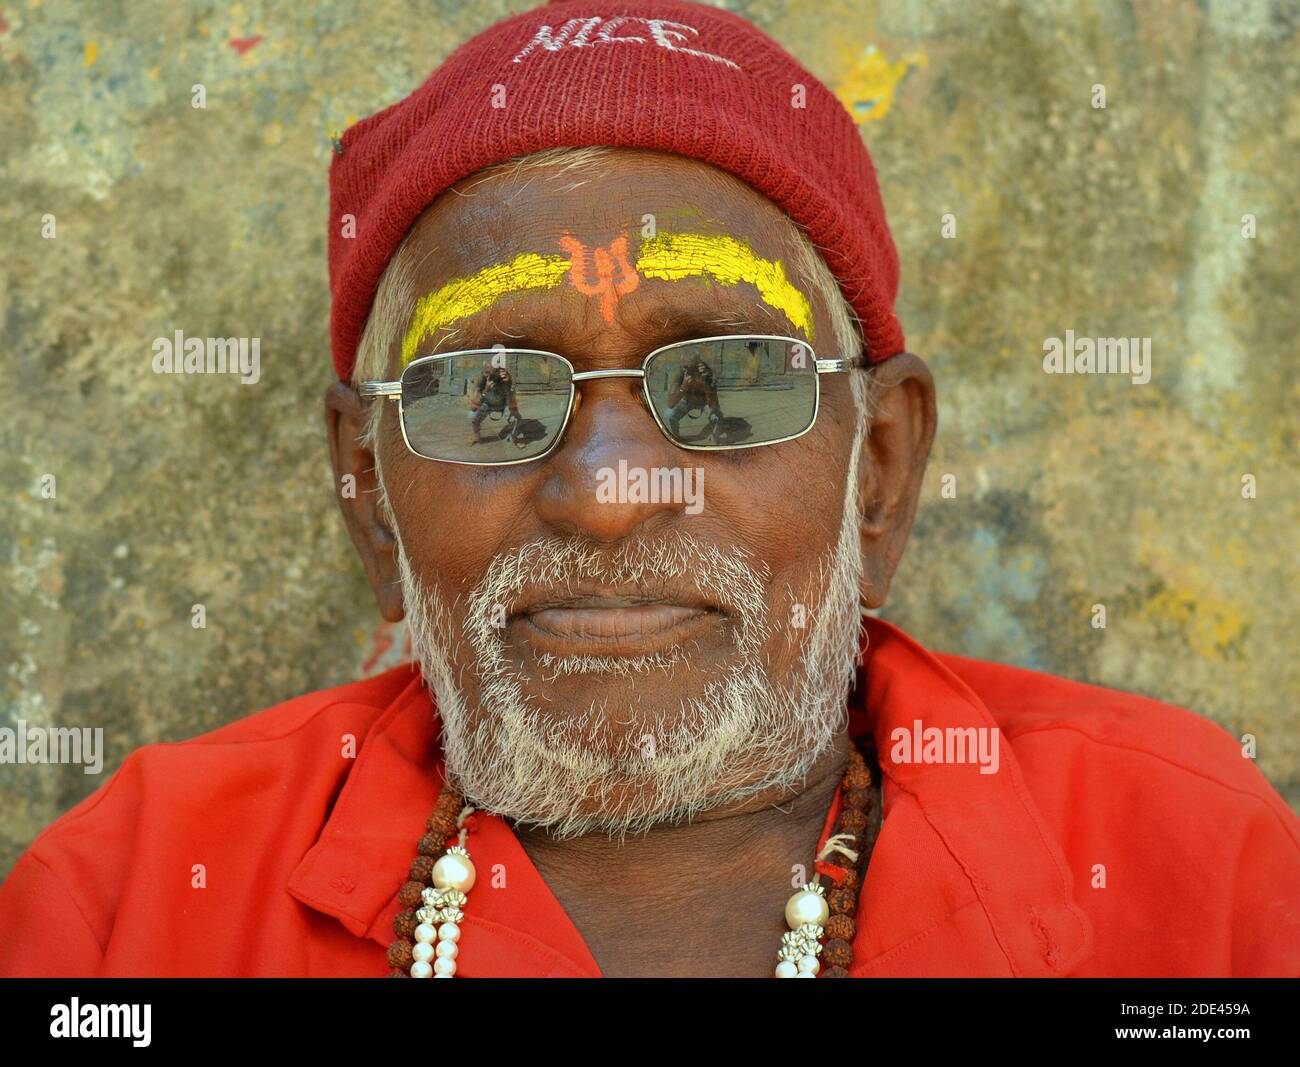 Elderly Indian Hindu pilgrim sadhu with yellow sandalwood paste and psi on his forehead wears mirrored sunglasses in front of stone wall background. Stock Photo